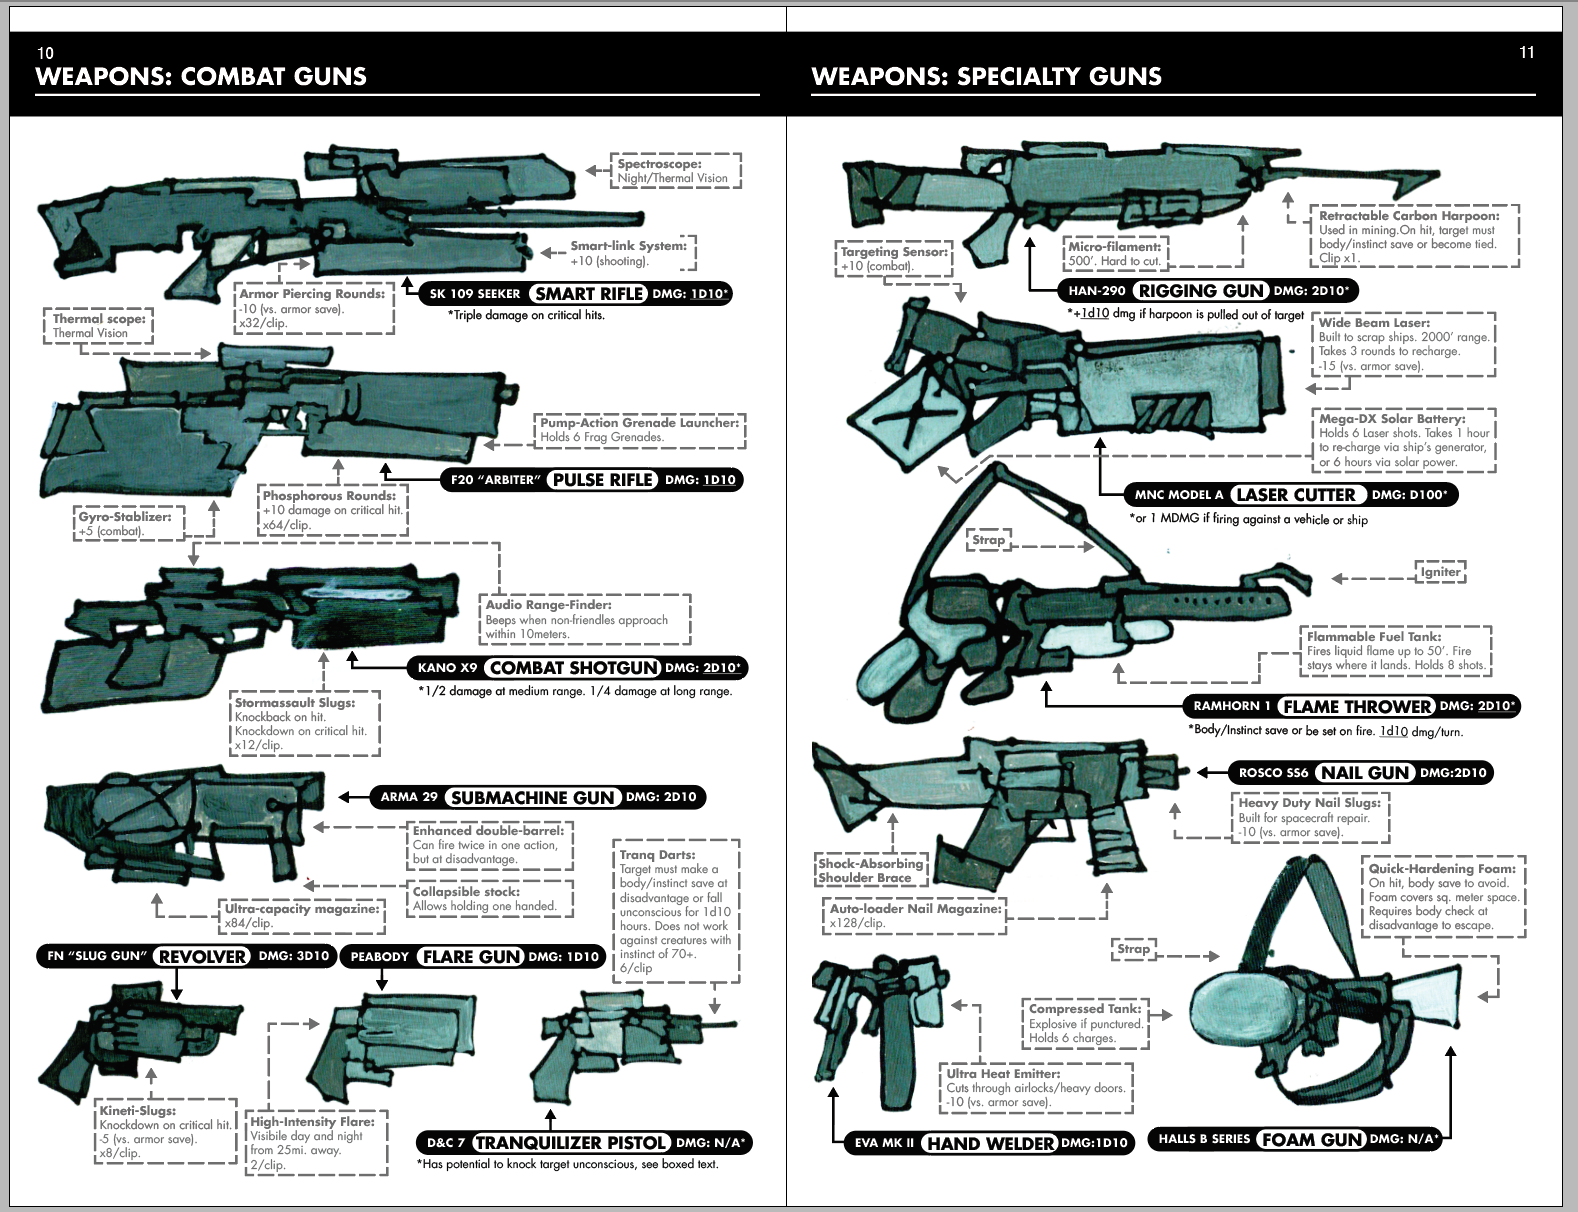 The Guns page spread